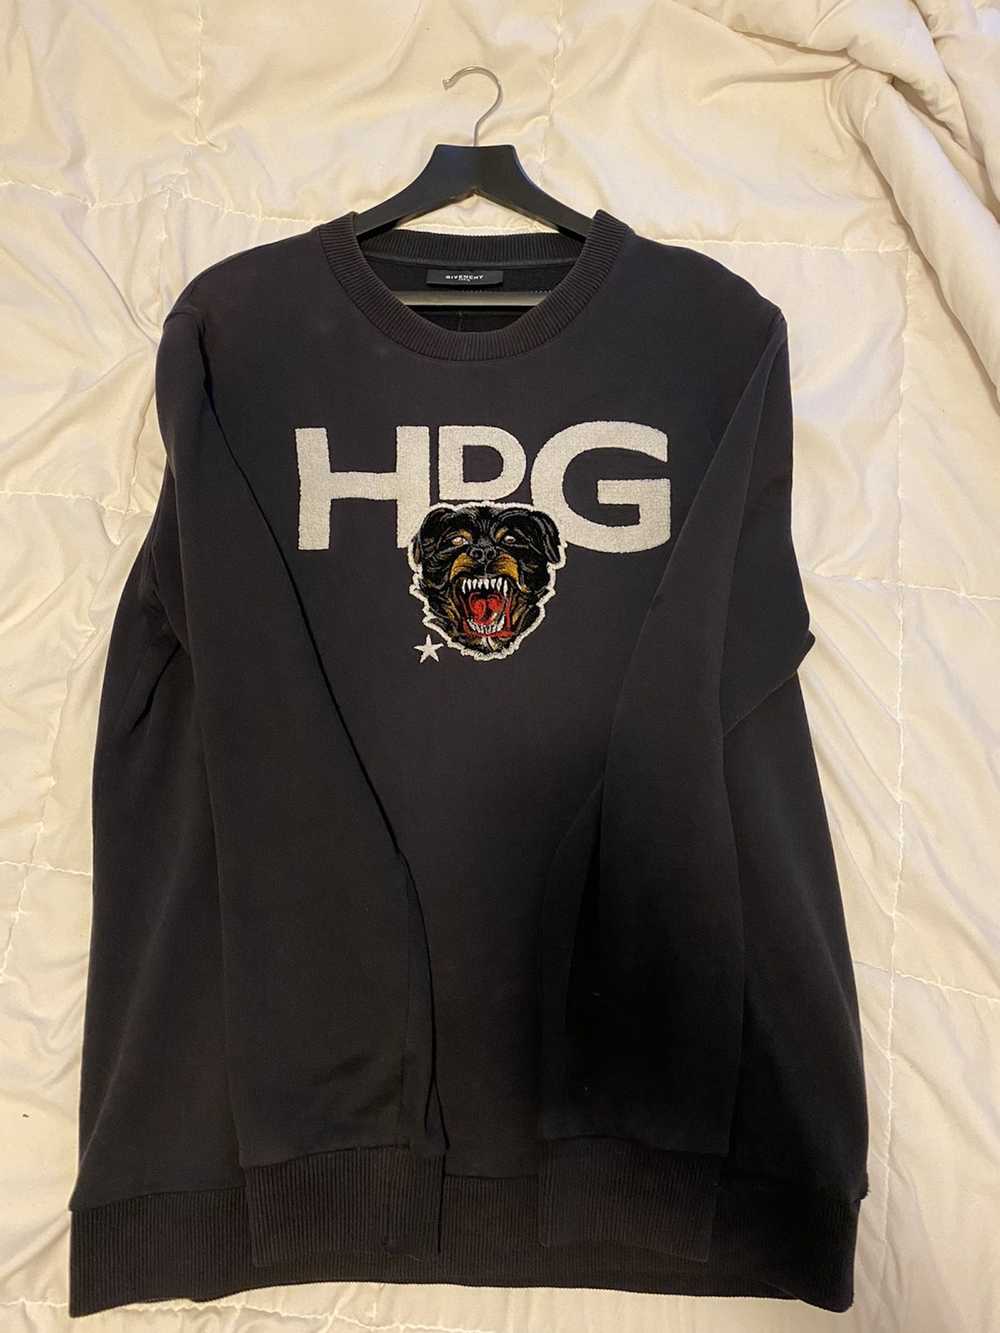 Givenchy Givenchy HDG Rottweiler Sweater - image 3